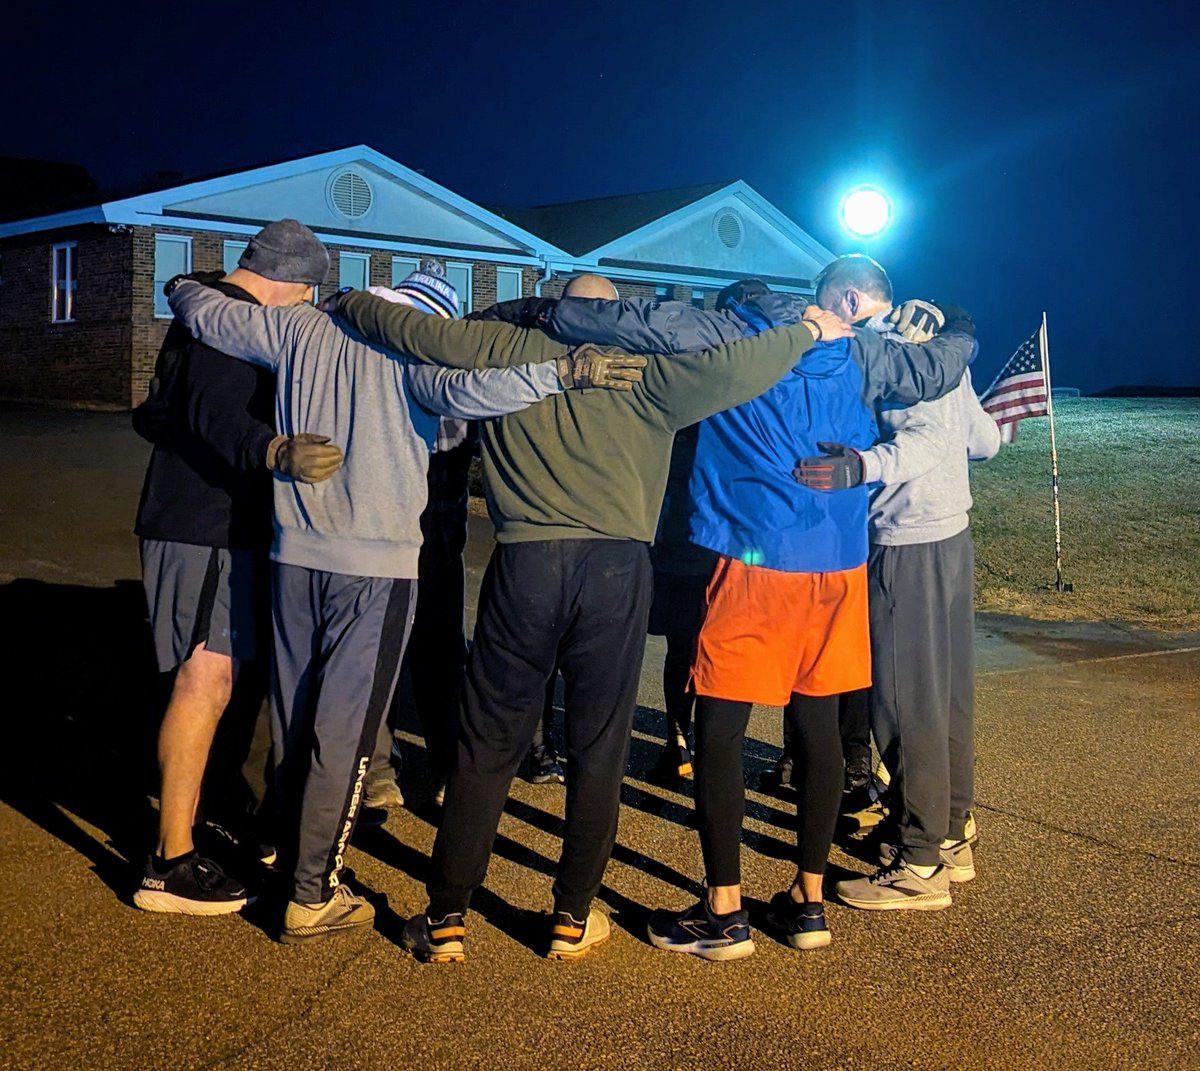 12x HIMs got up and out in the freezing cold to get their Fitness on. #AO_MonsterMile is alive and well in the 115 - even got some @F3Davidson crew joining us for the Beatdown. @F3GhostFlagNC gracing our region with its glorious presence. So, Men of @MooresvilleNC join us!